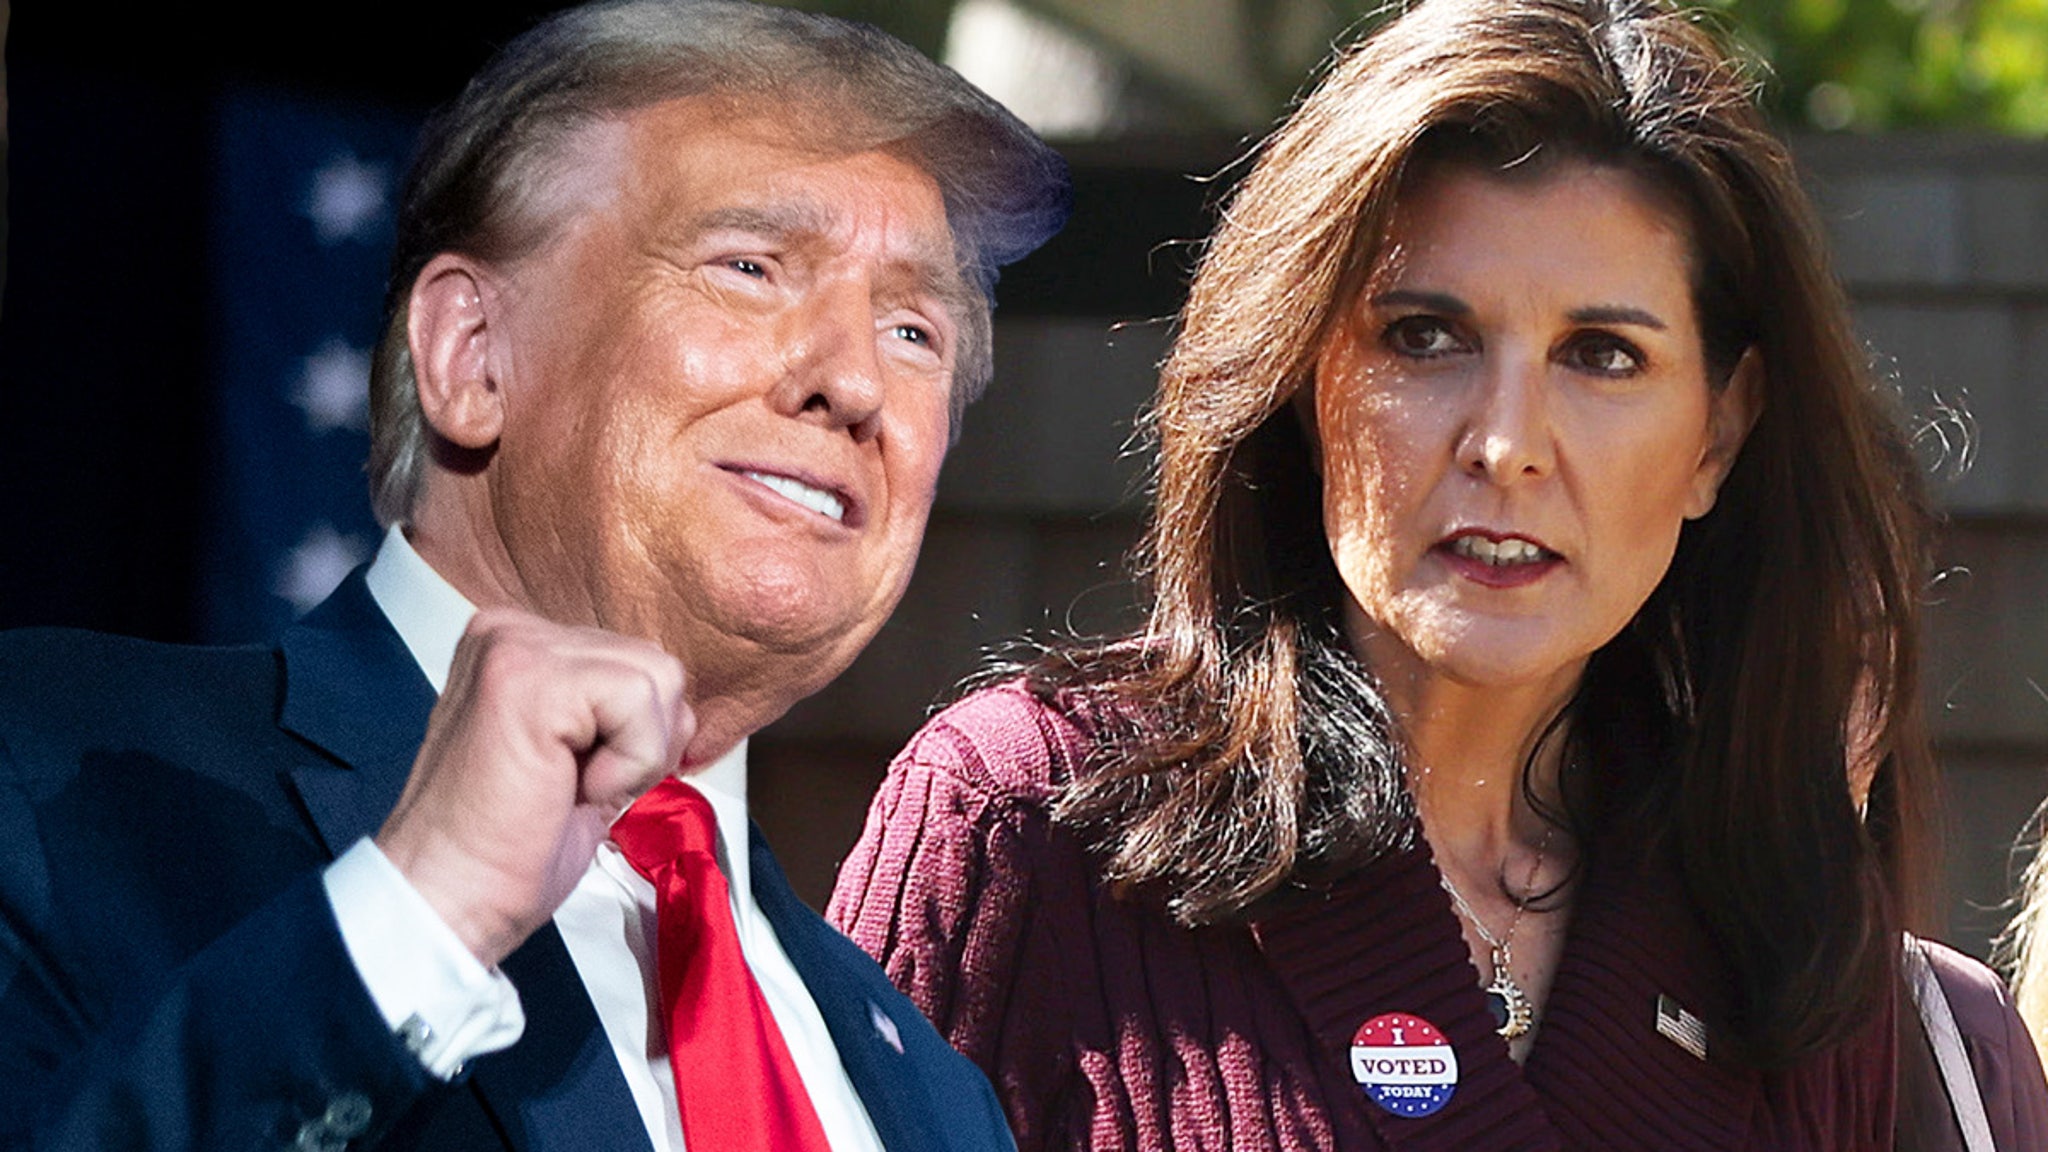 Donald Trump Defeats Nikki Haley in Primary For Home State South Carolina